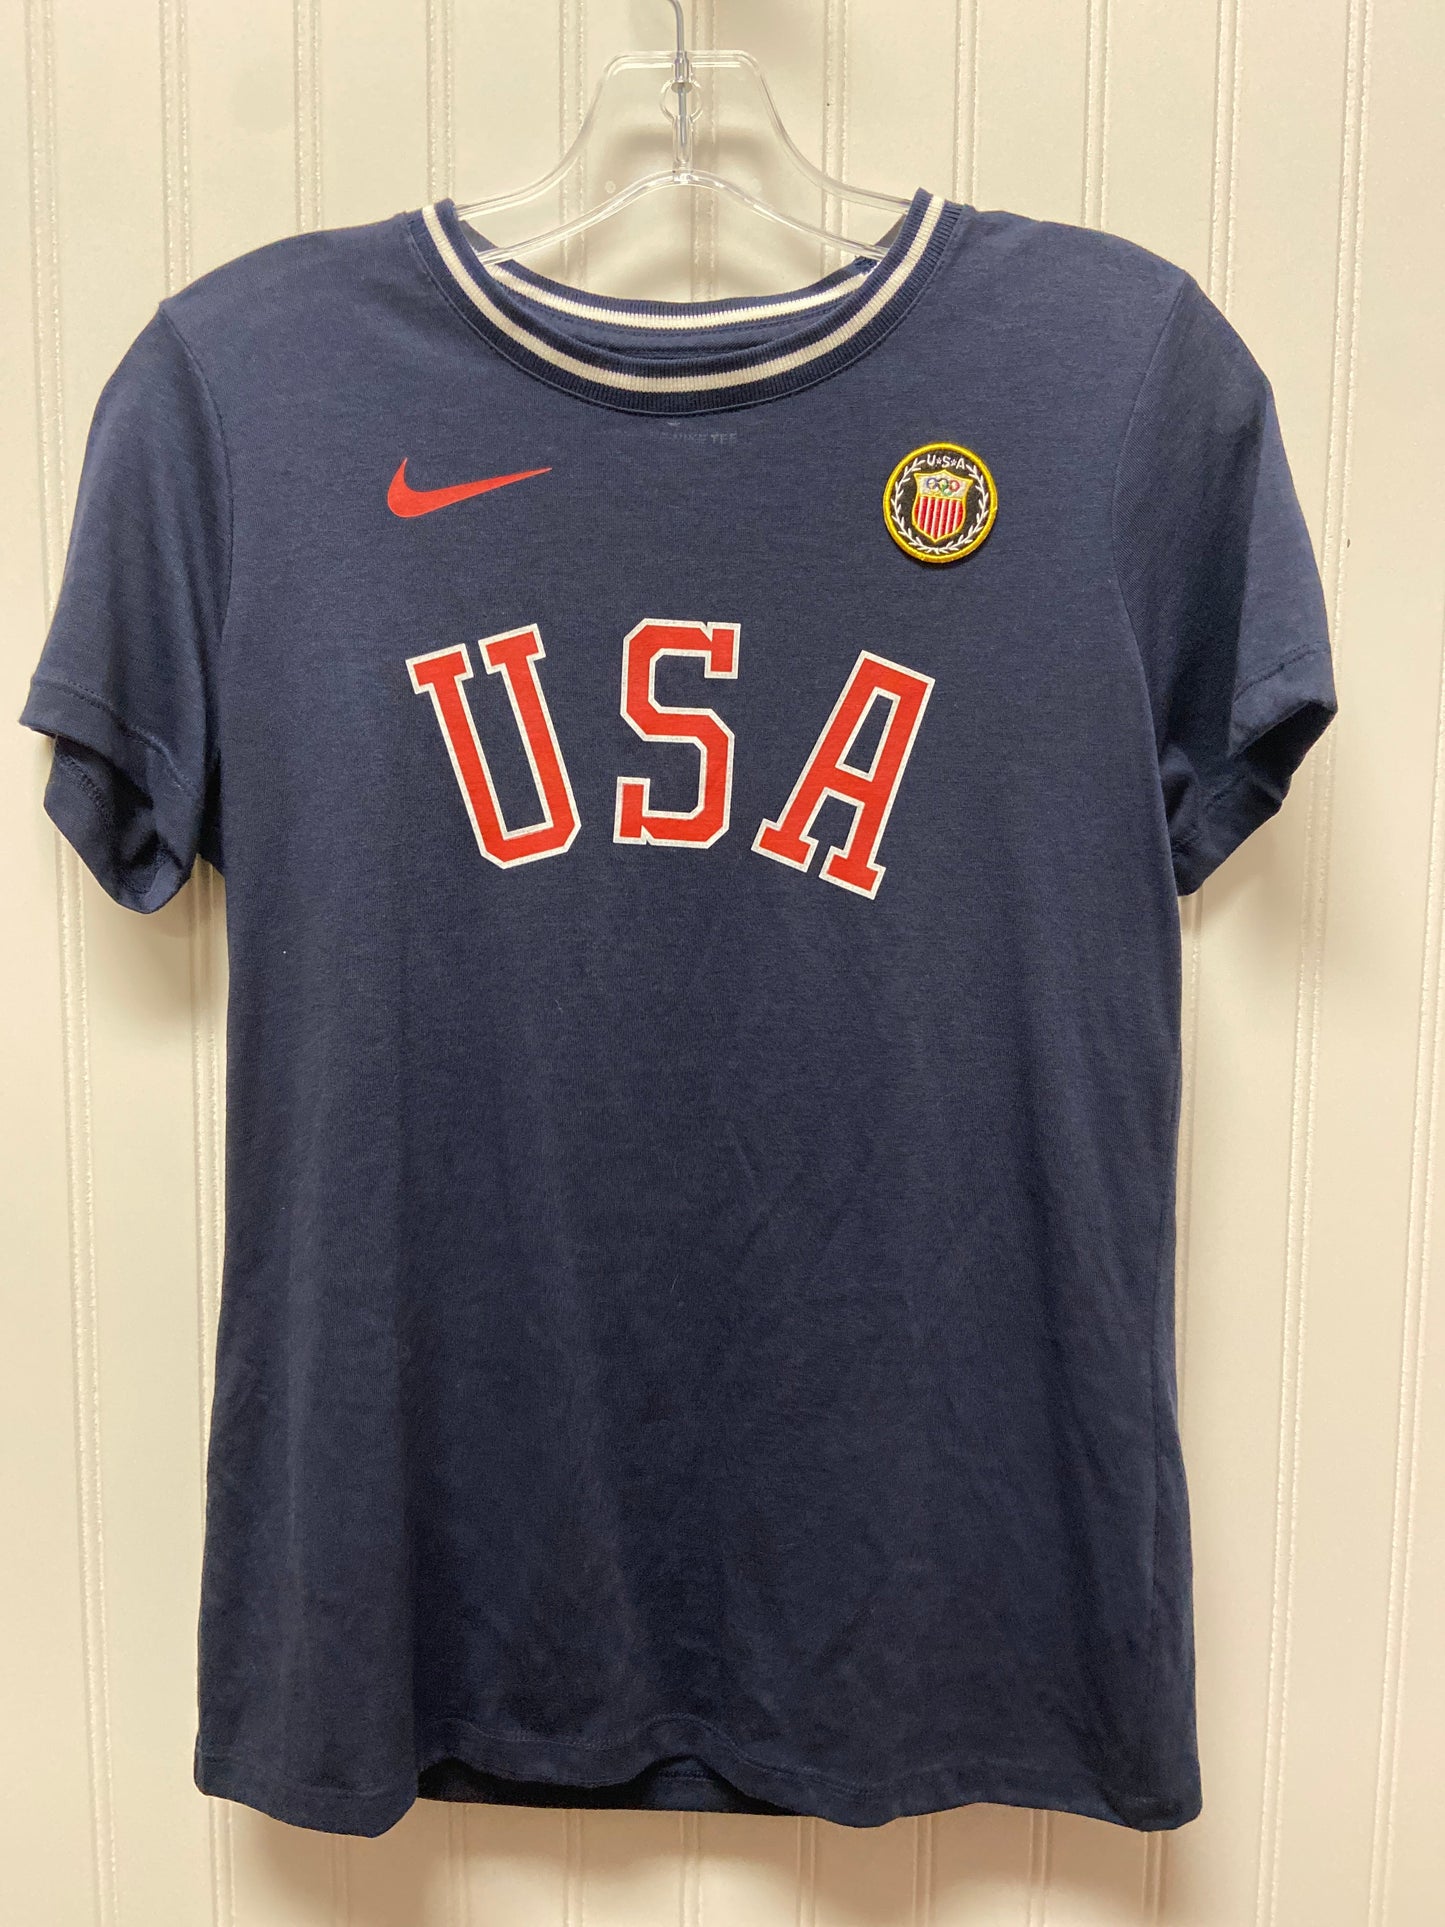 Navy Athletic Top Short Sleeve Nike, Size S